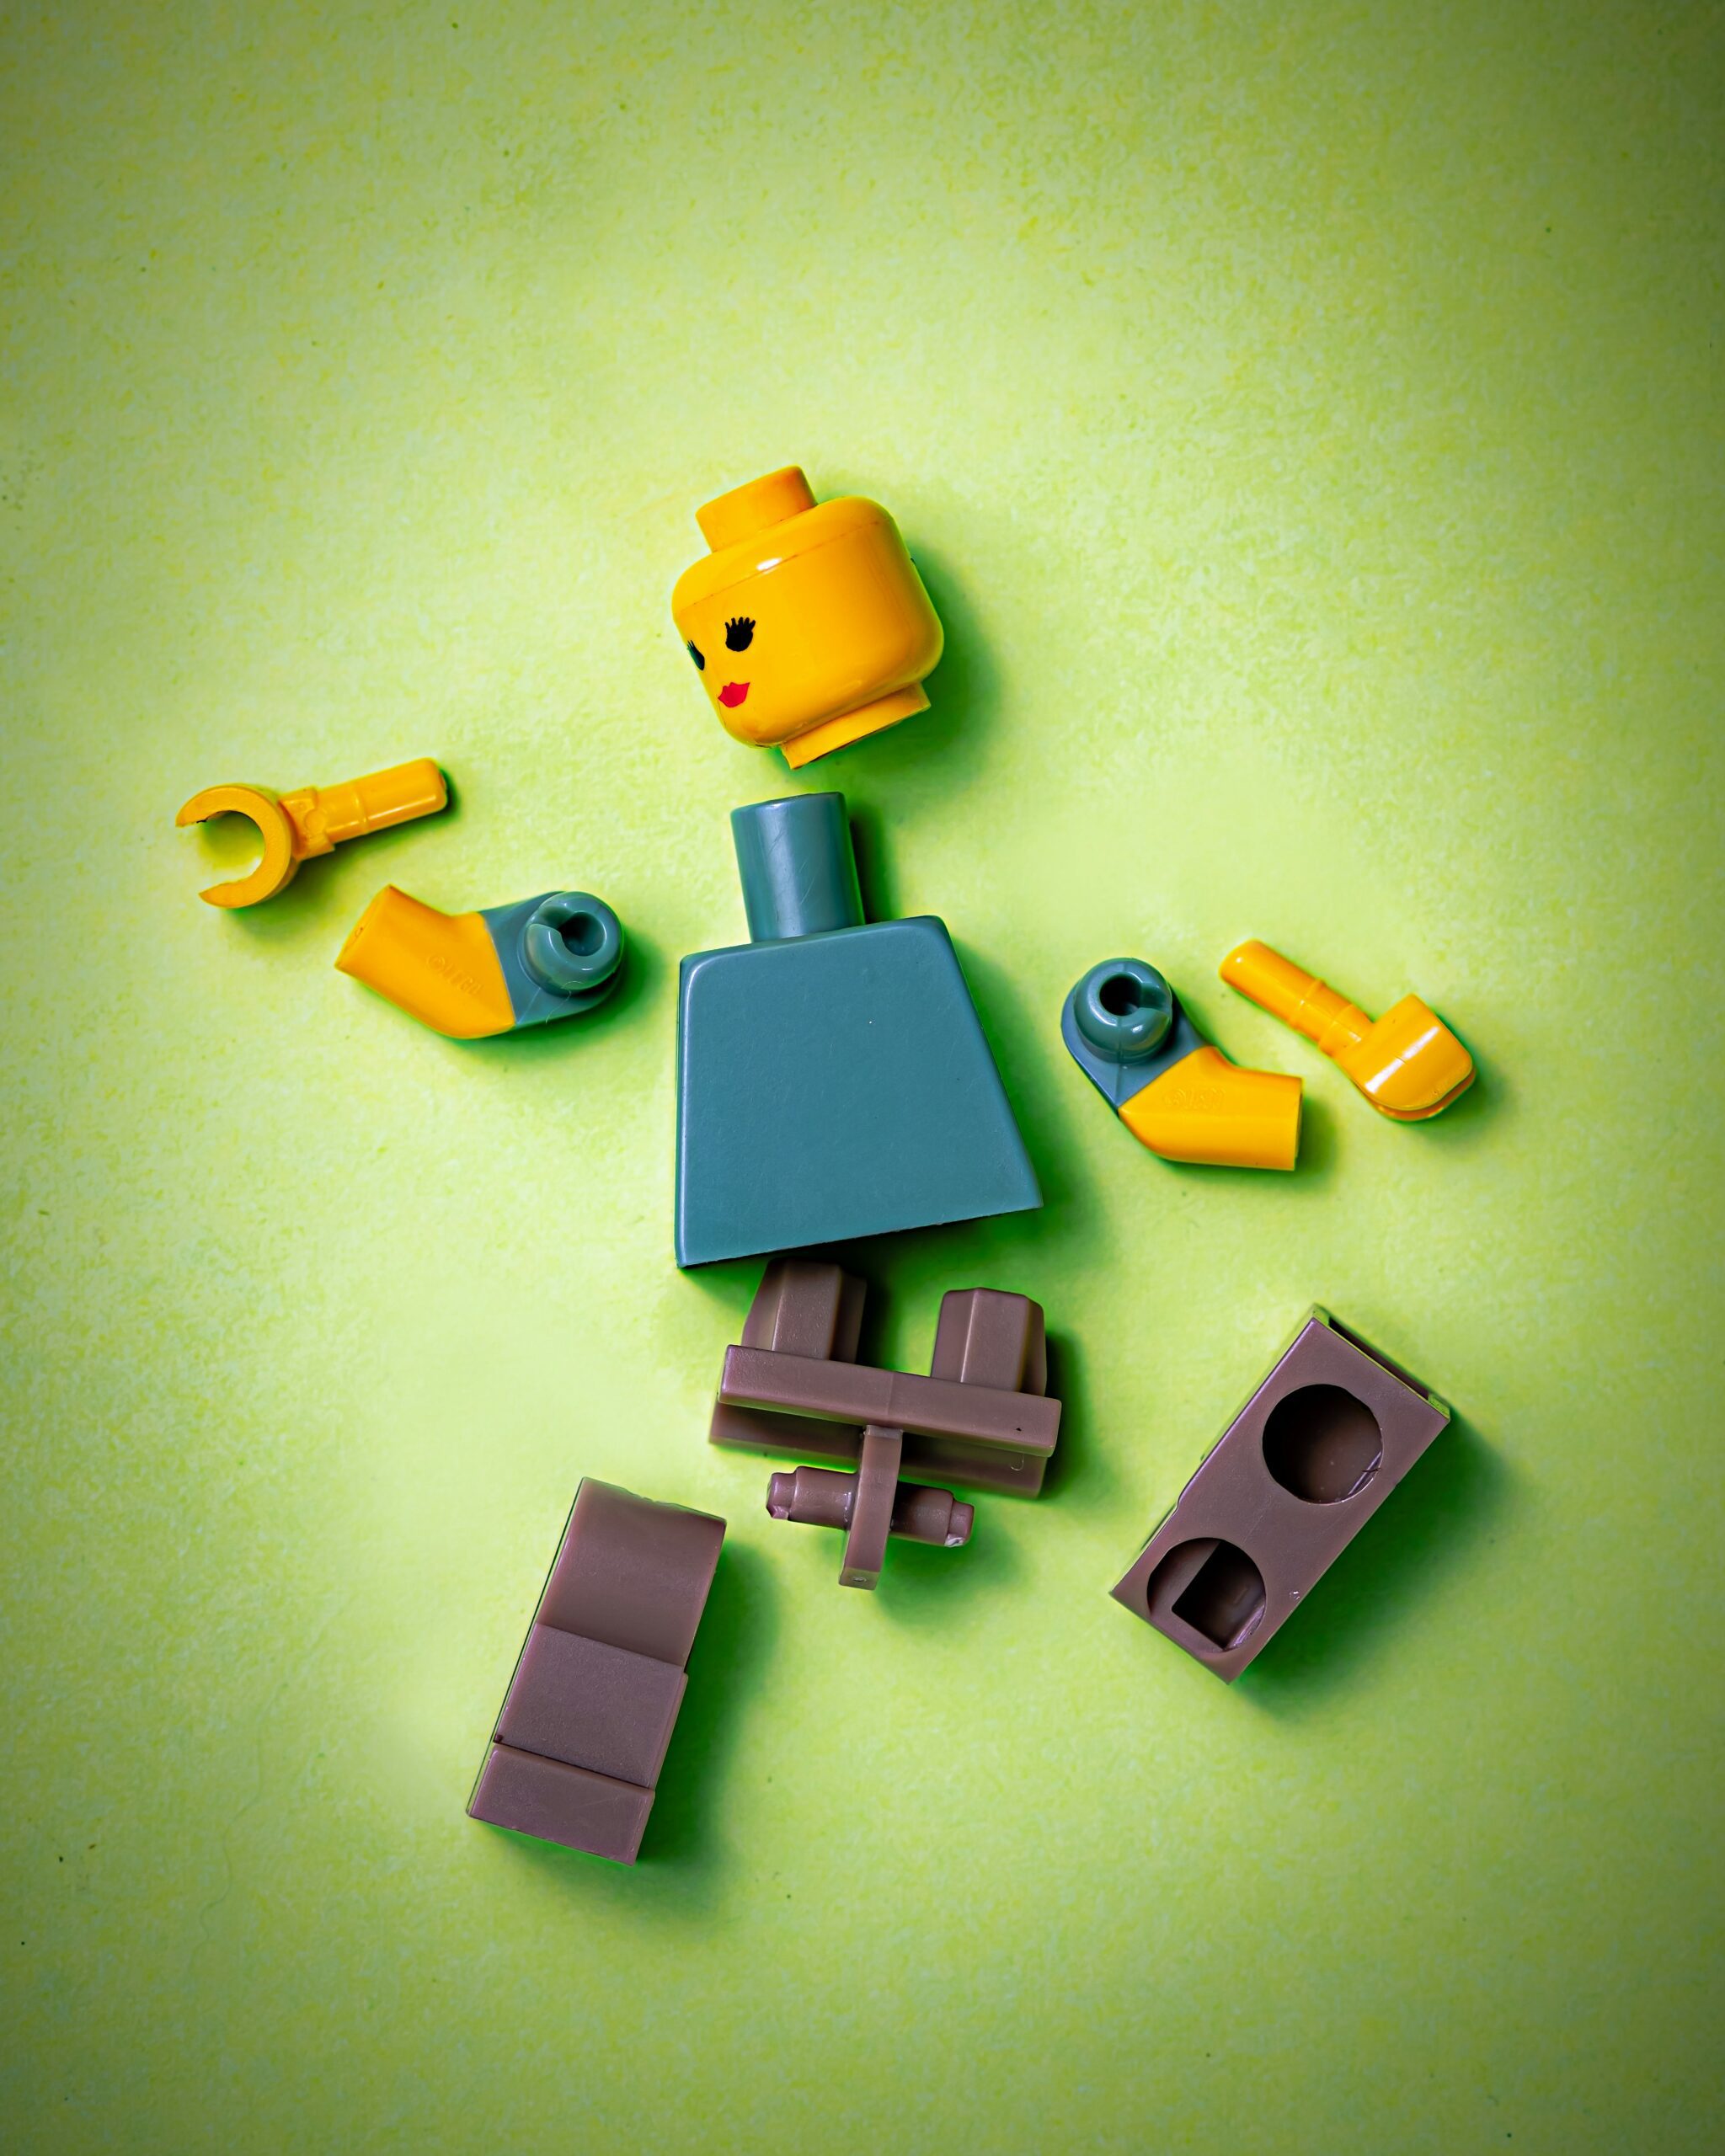 Lego figure come apart in pieces